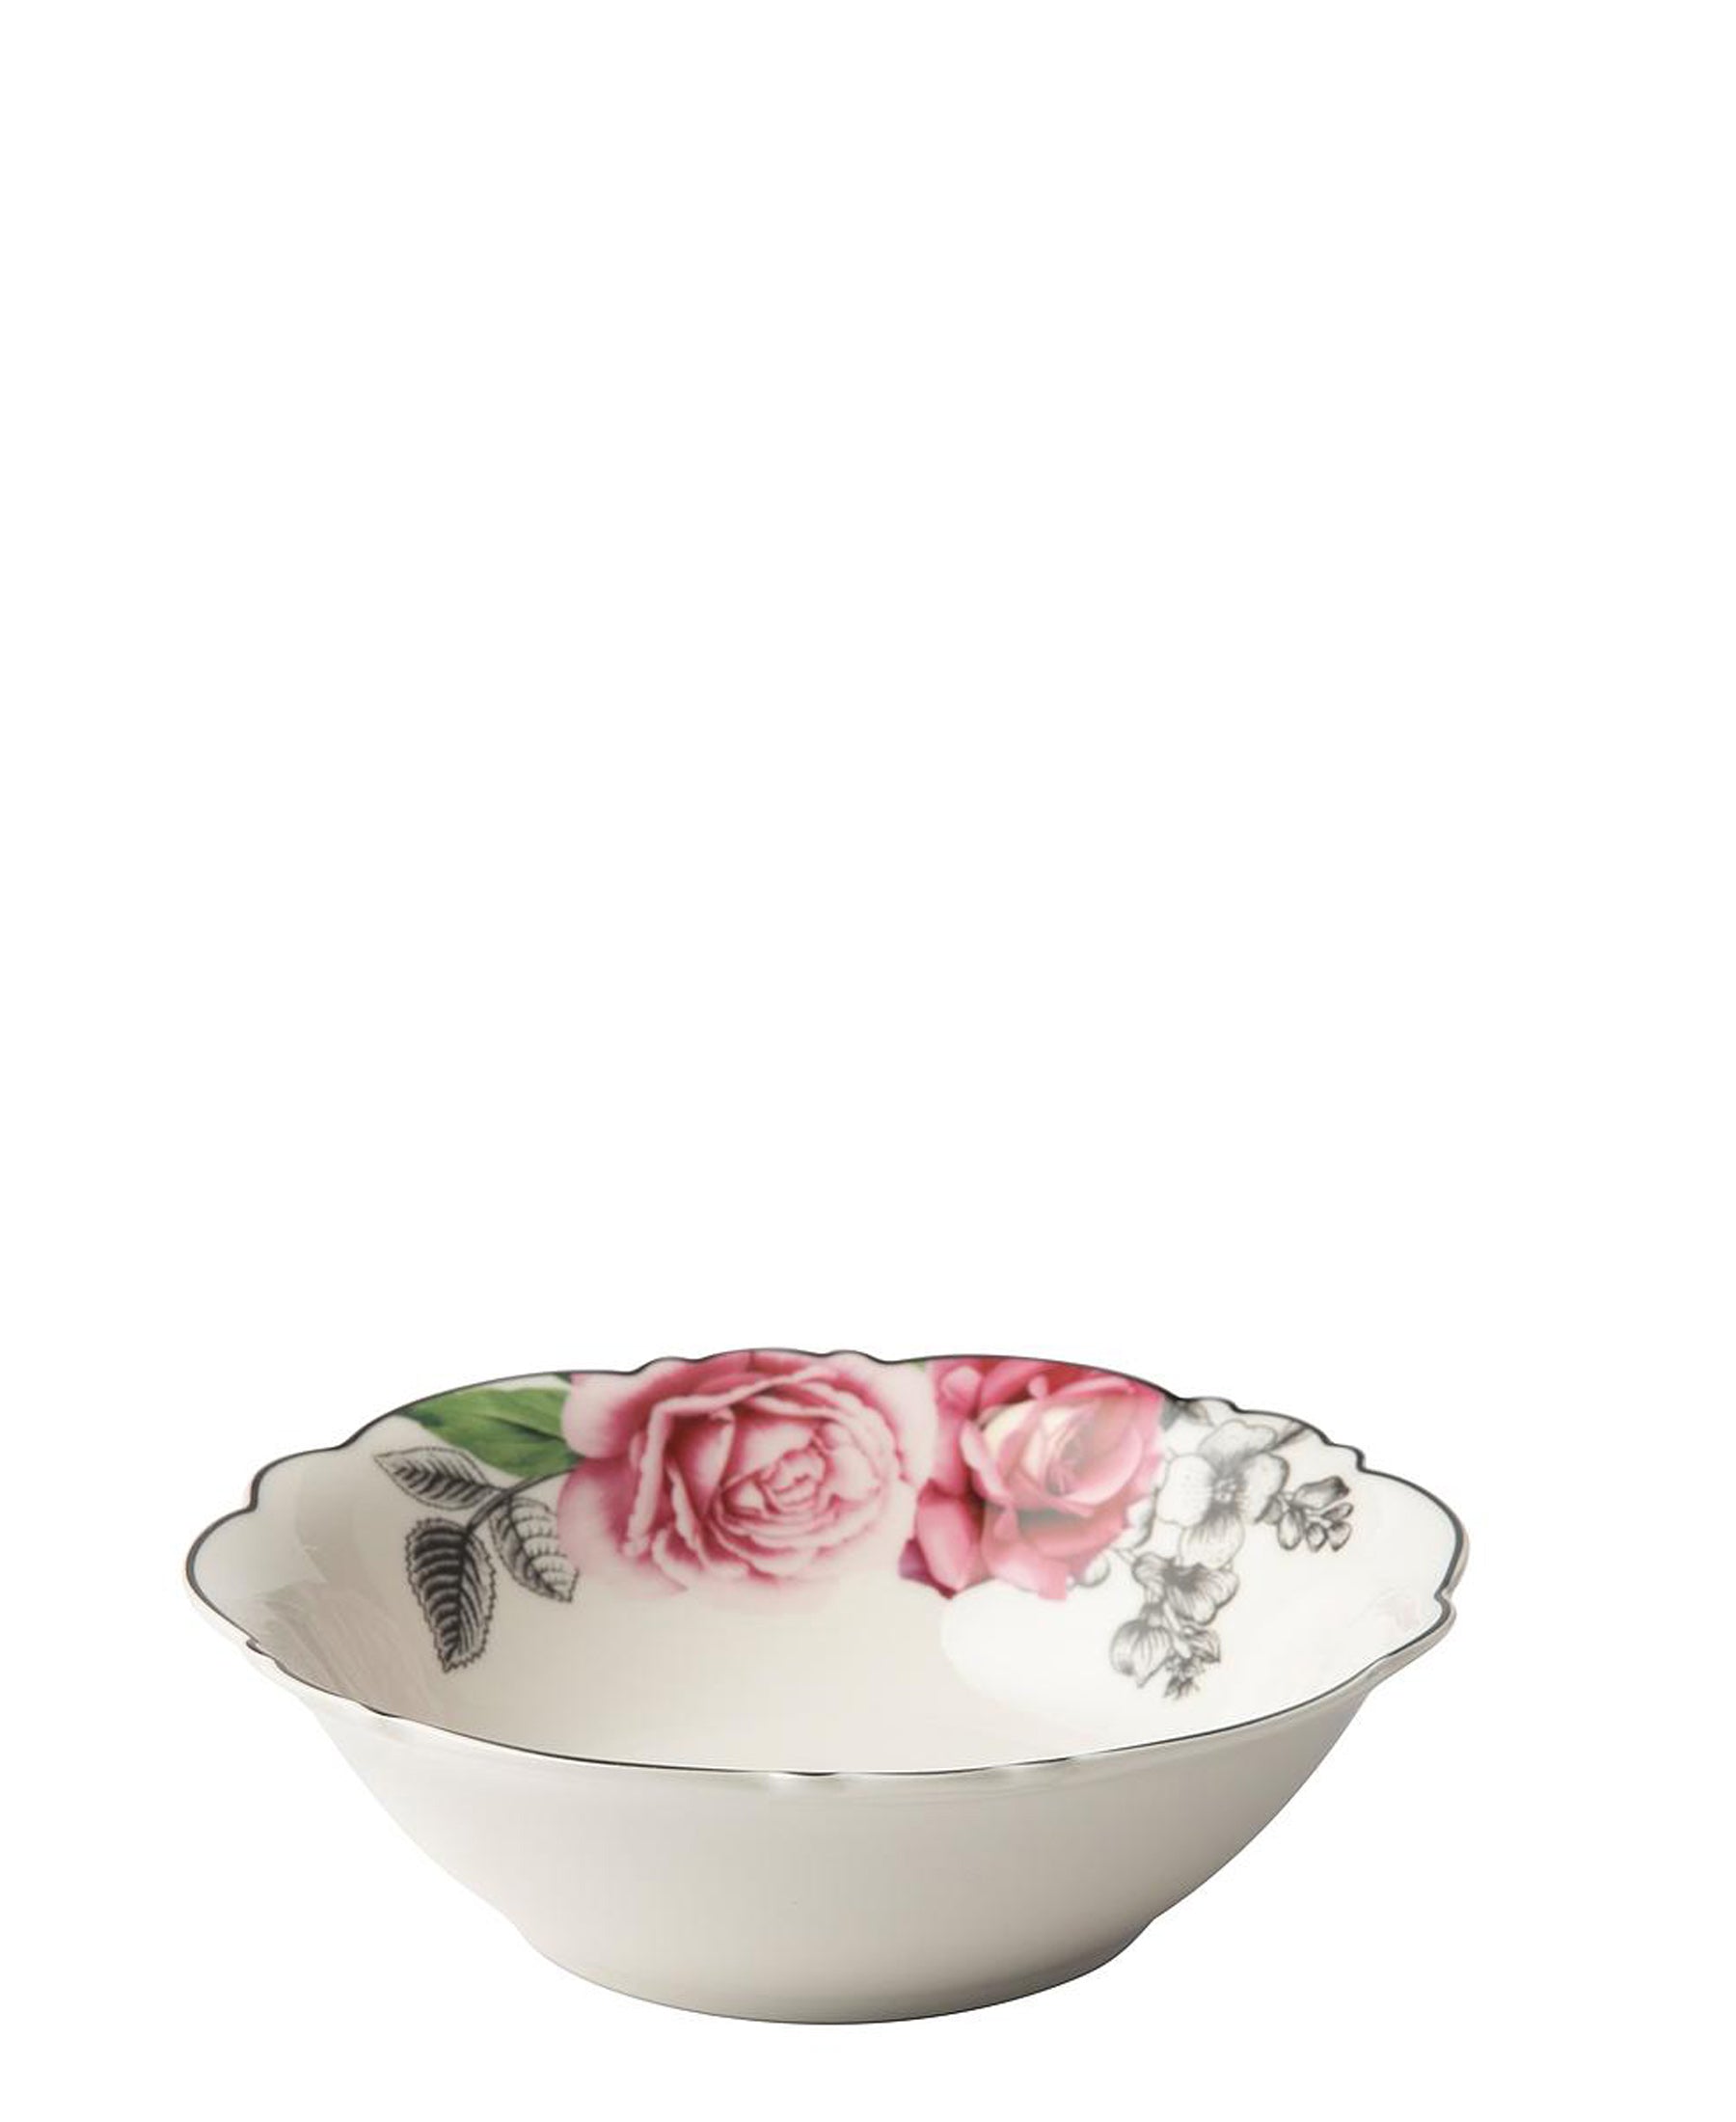 Jenna Clifford Wavy Rose Cereal Bowl 17.8cm - White & Pink